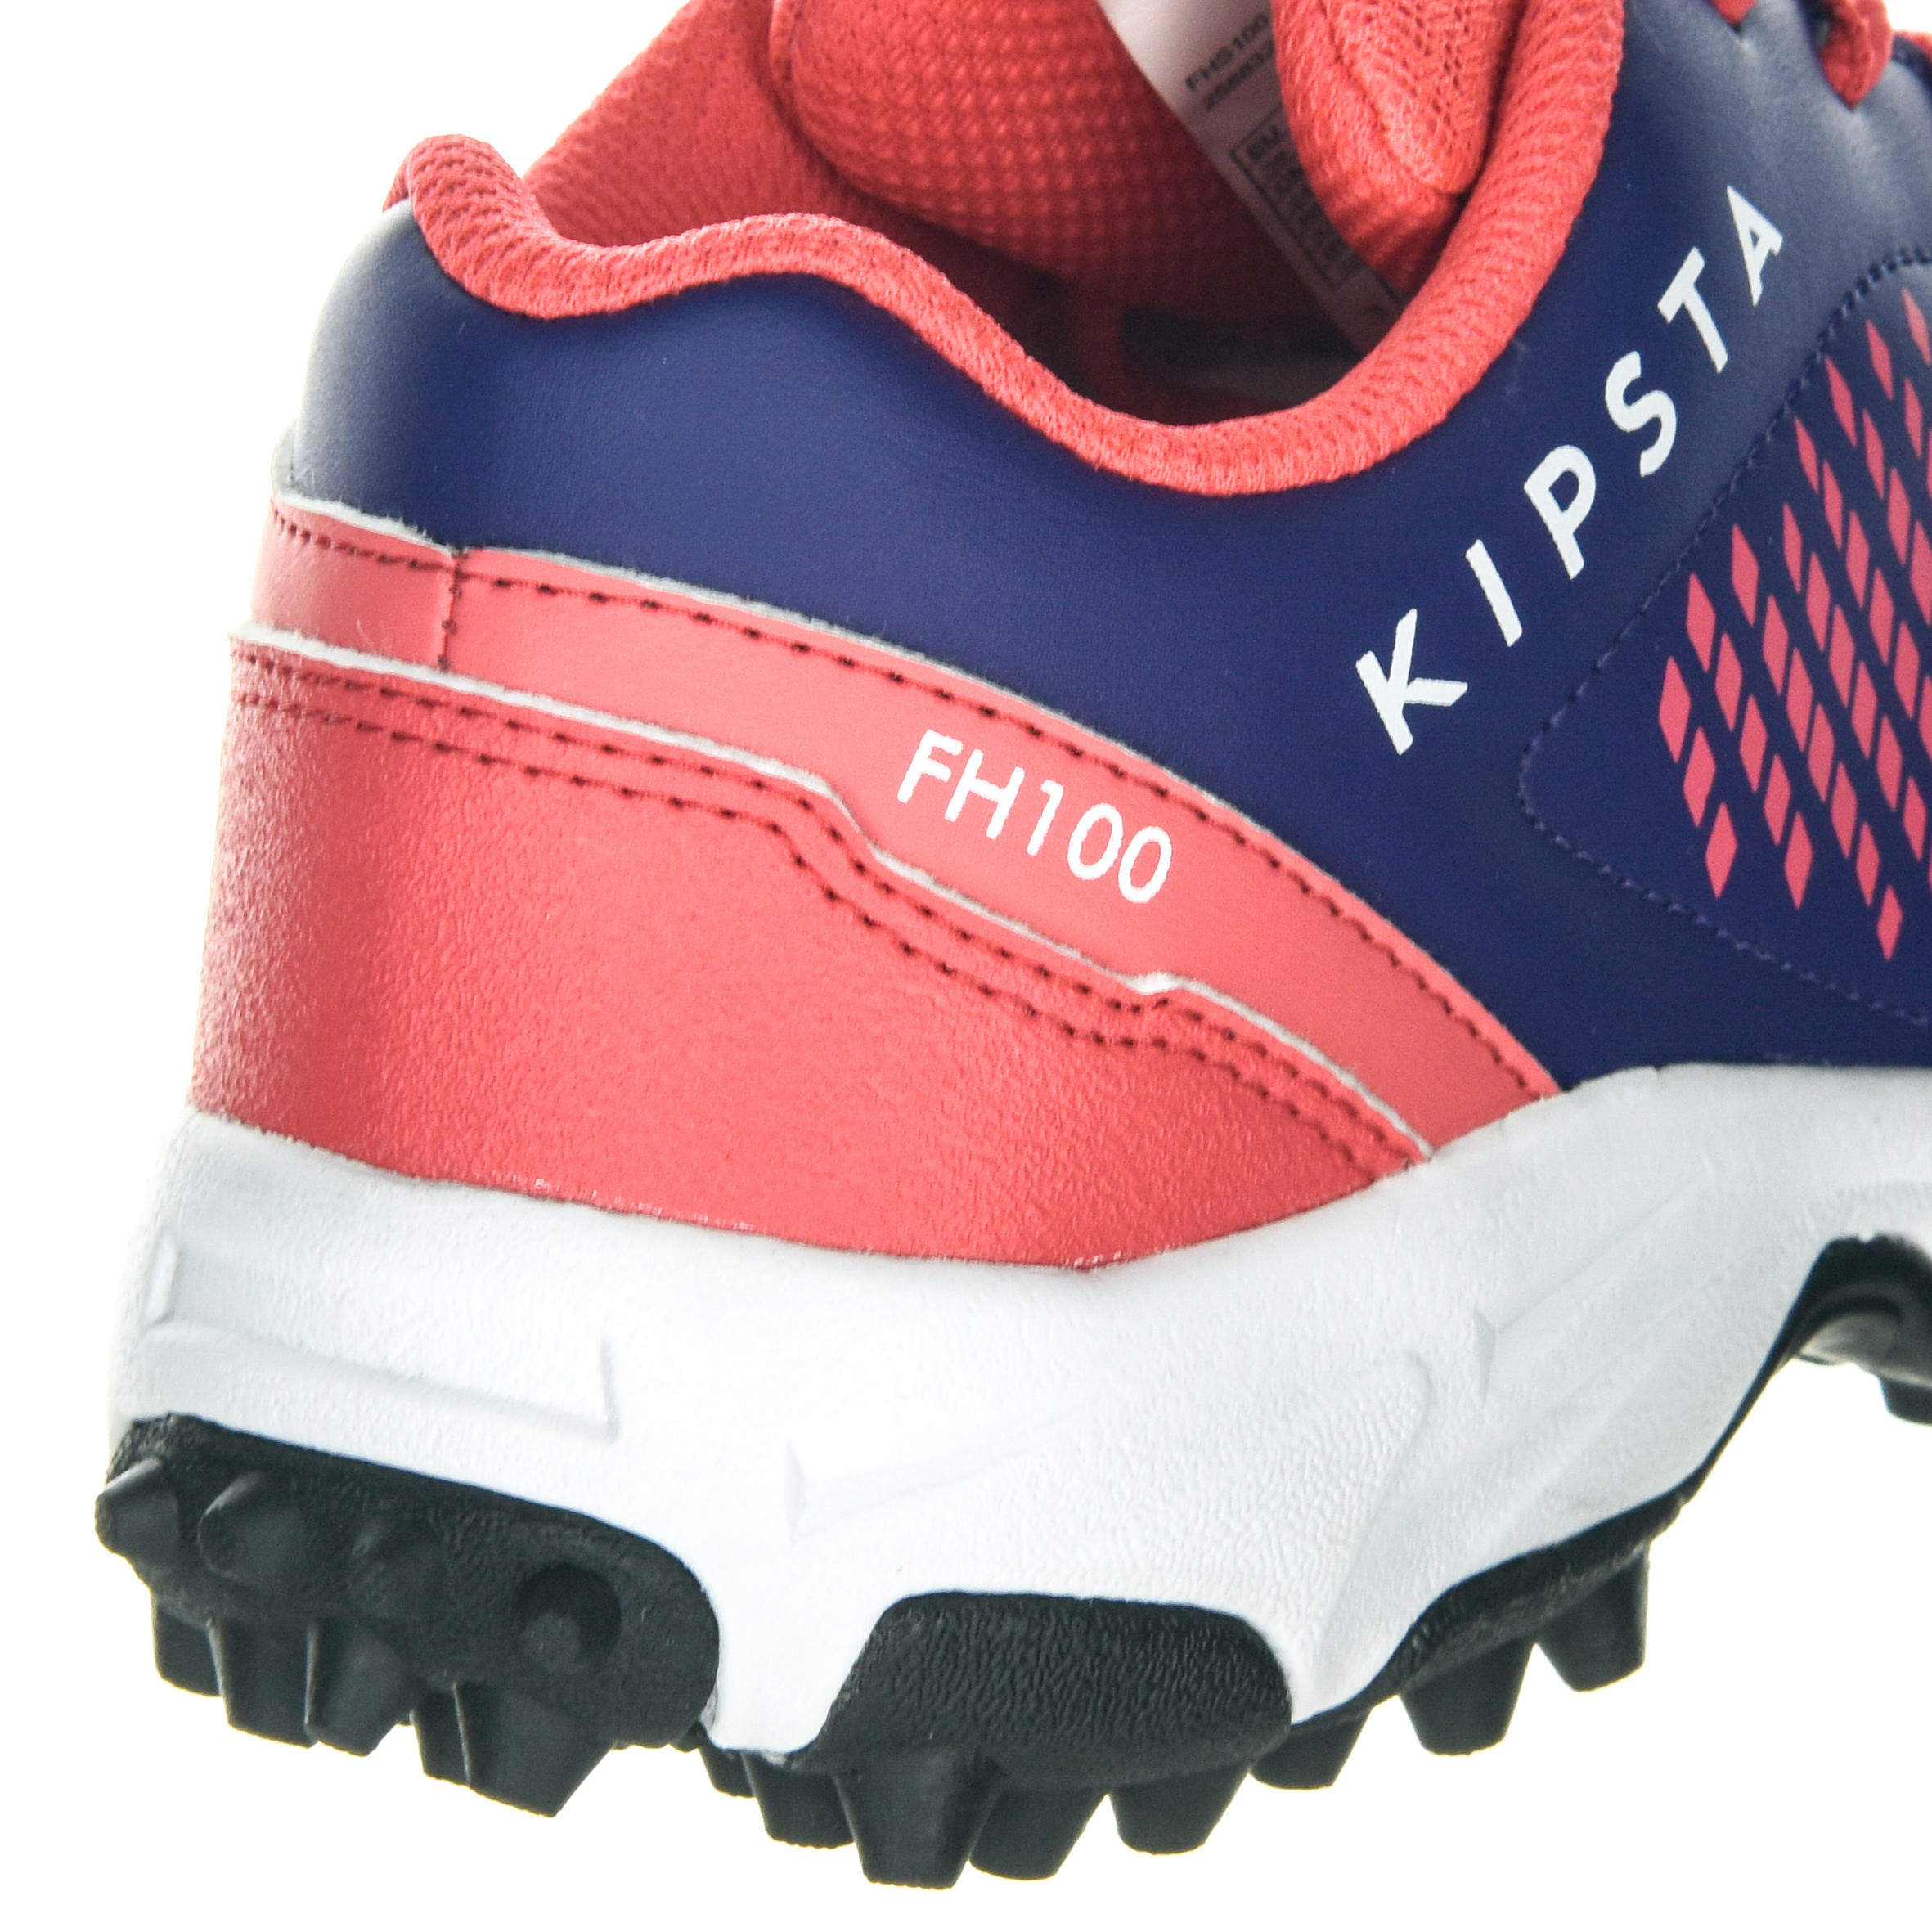 FH100 Kids' Low to Medium Intensity Field Hockey Shoes - Pink 12/13